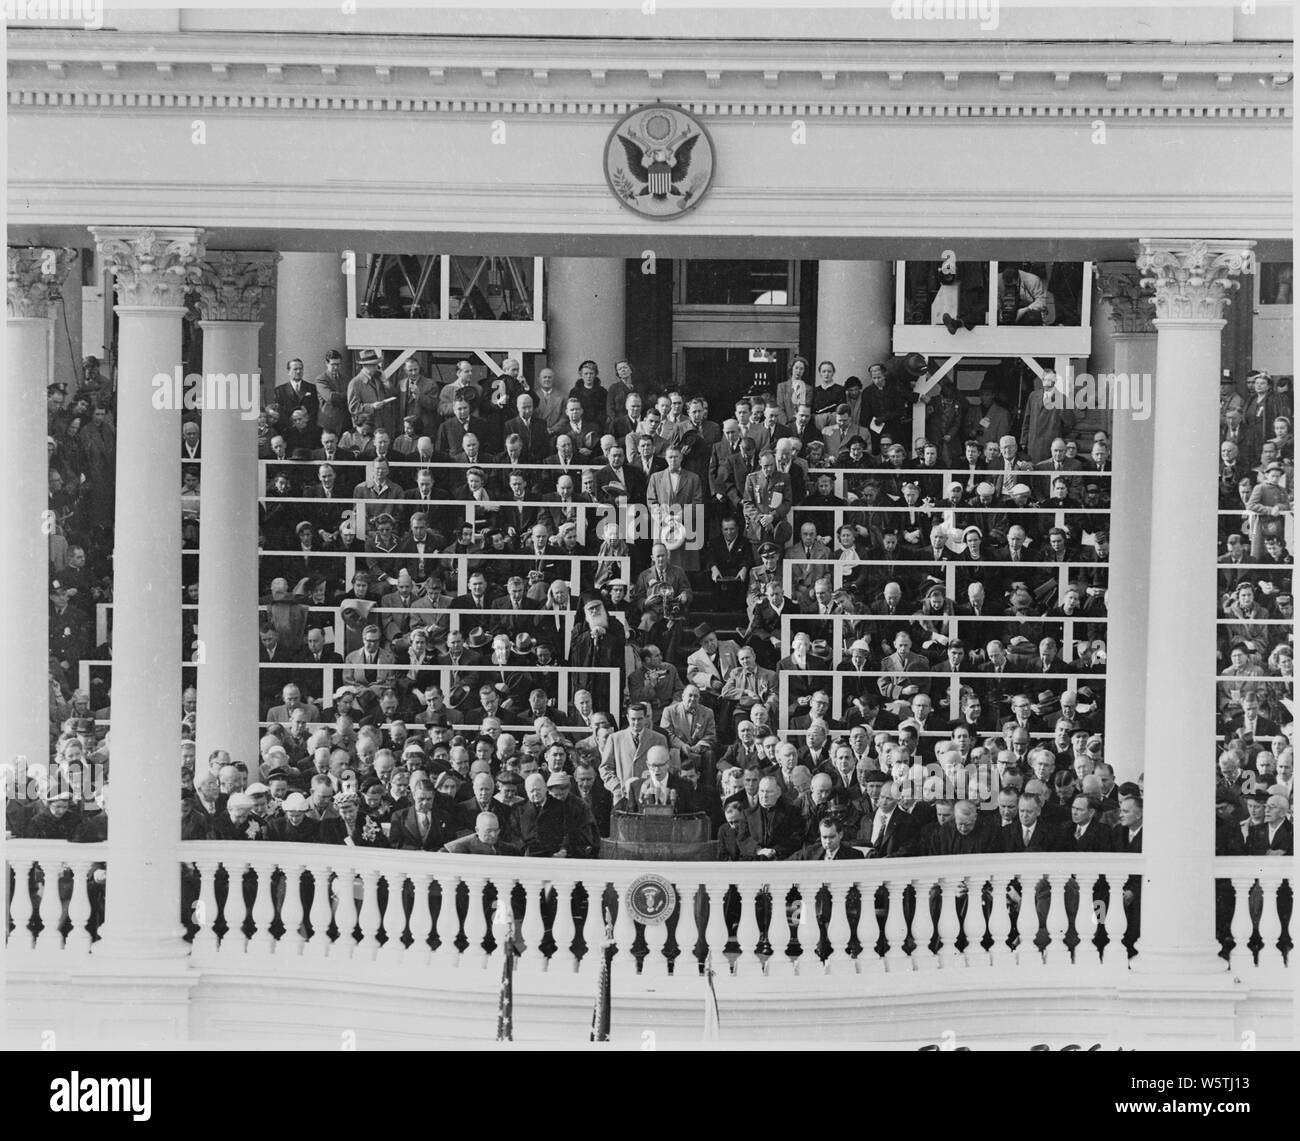 Photograph of Dwight D. Eisenhower delivering his Inaugural Address after taking the oath of office as President, as former Presidents Truman and Hoover, and other dignitaries, look on. Stock Photo